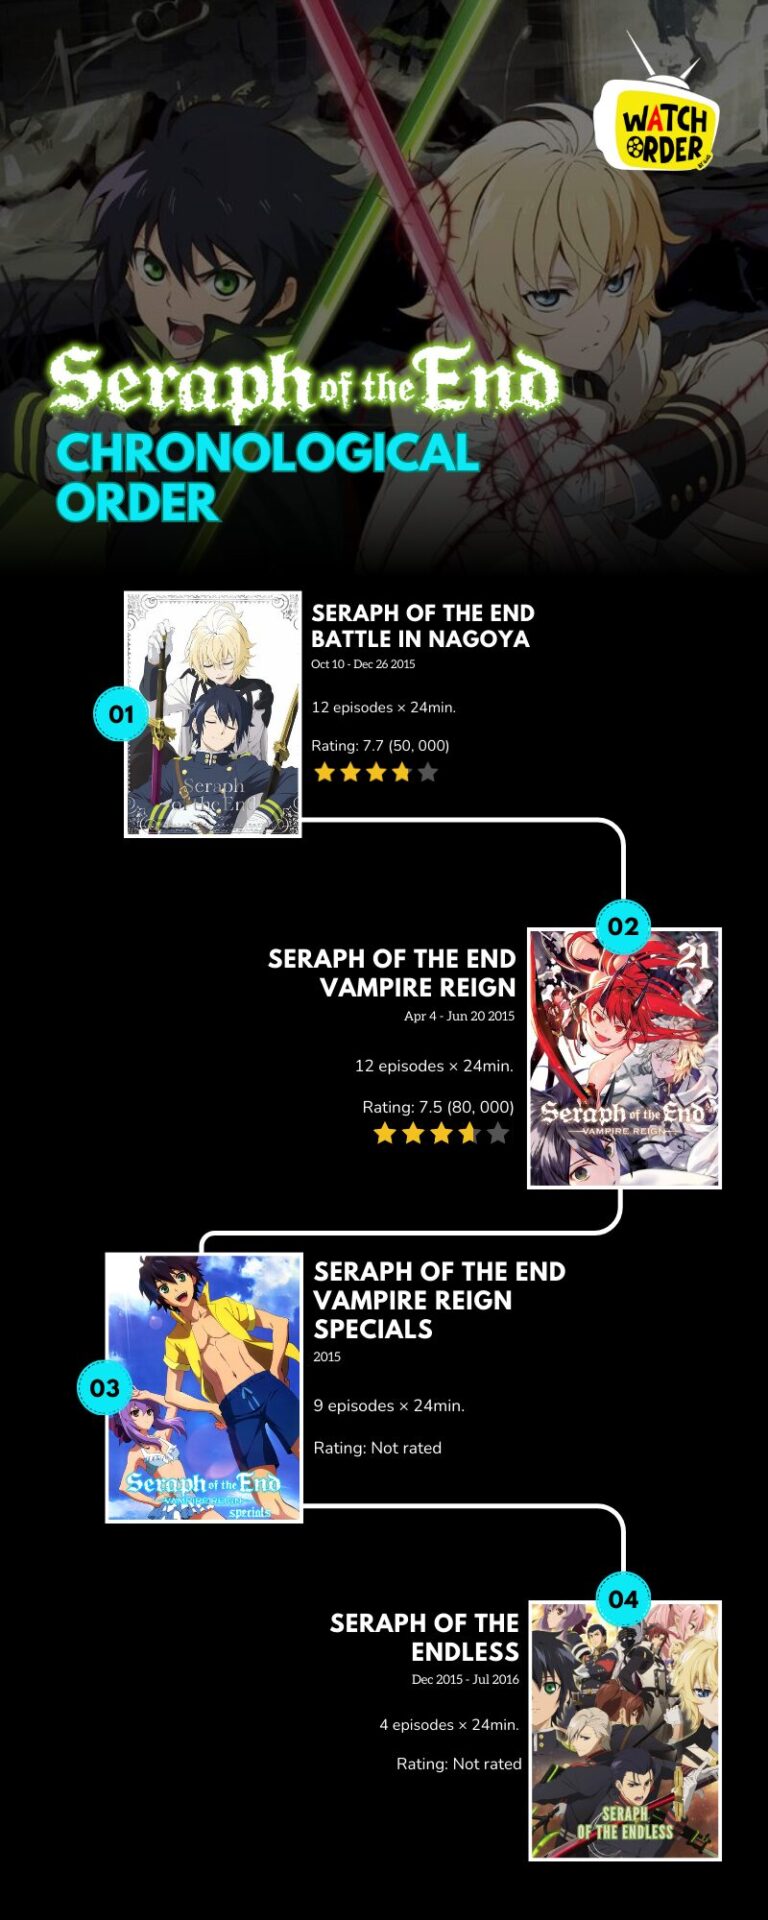 Seraph of the End Chronological Order Infographic